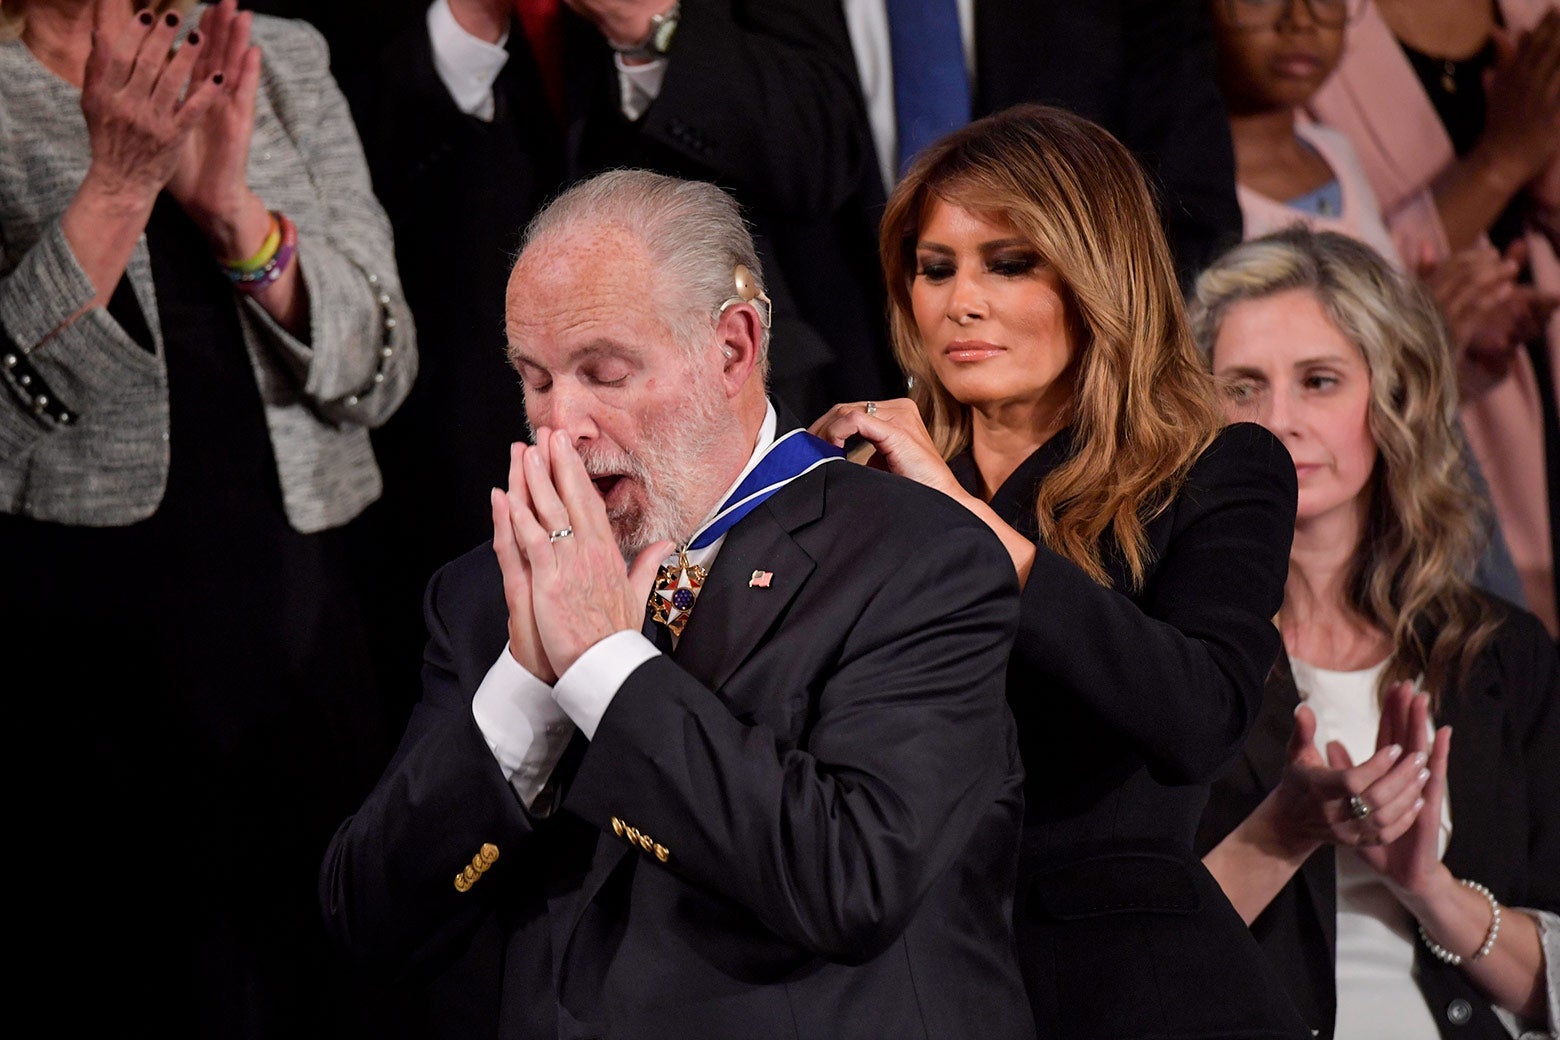 Melania Trump puts a medal around Rush Limbaugh's neck as he holds his hands to his face.